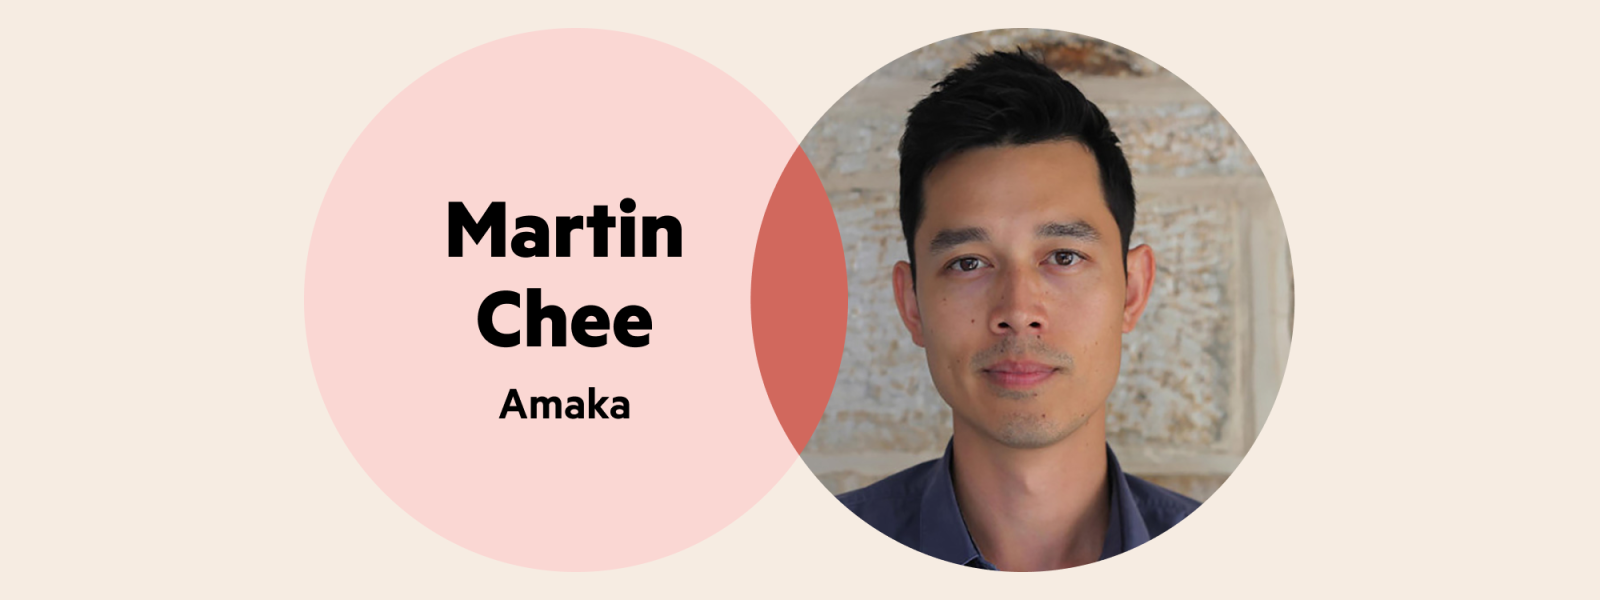 A Venn diagram. The left circle is pale pink with the words 'Martin Chee, Amaka', and the right circle is Martin's headshot. He has short black hair and is wearing a gray collared shirt.